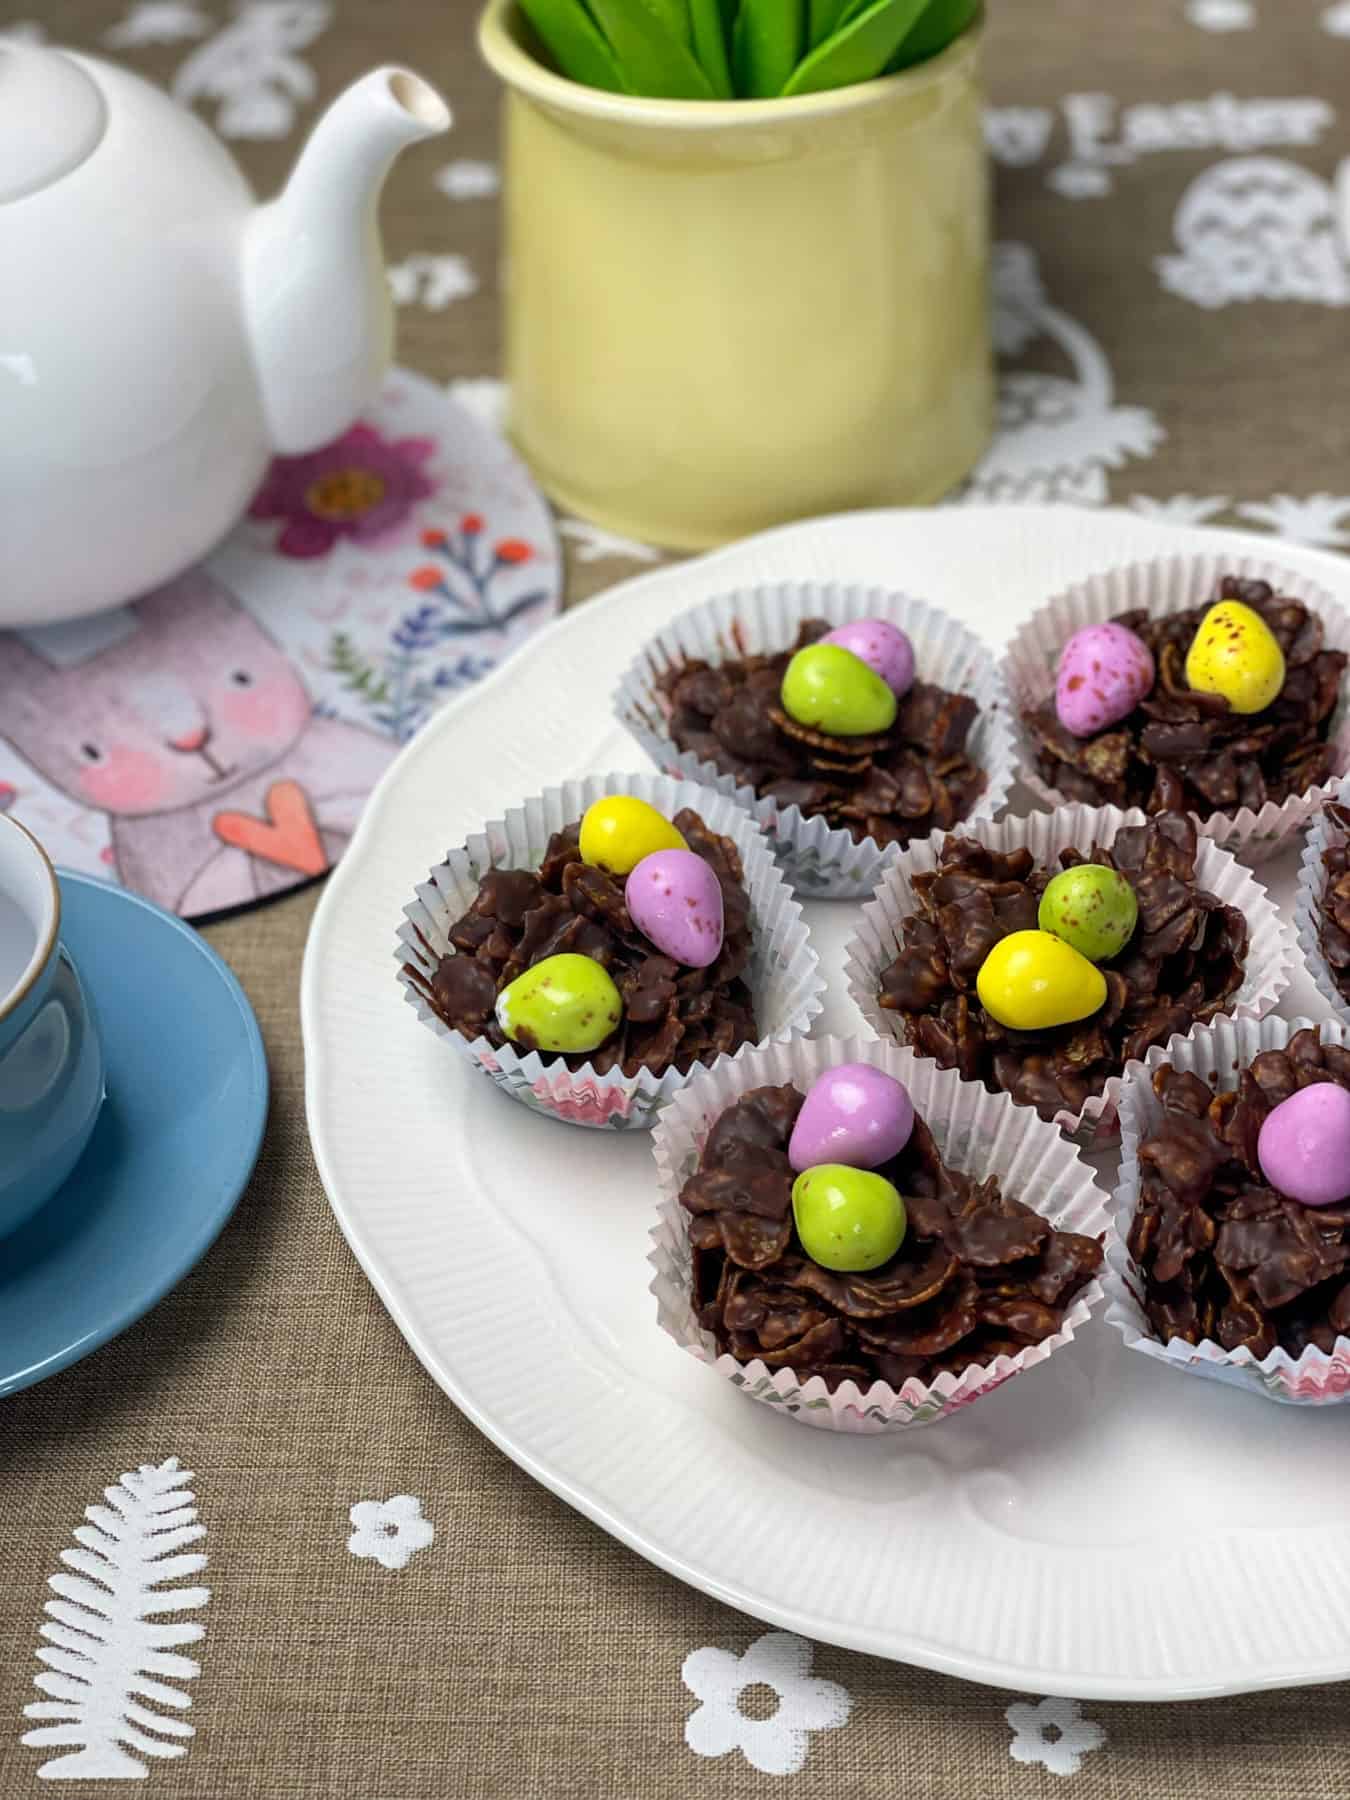 A large white plate full of chocolate cornflake cakes, white tea pot to side, blue tea cup and saucer to side, yellow jug with flower stems to background, rabbit image tea pot placemat.